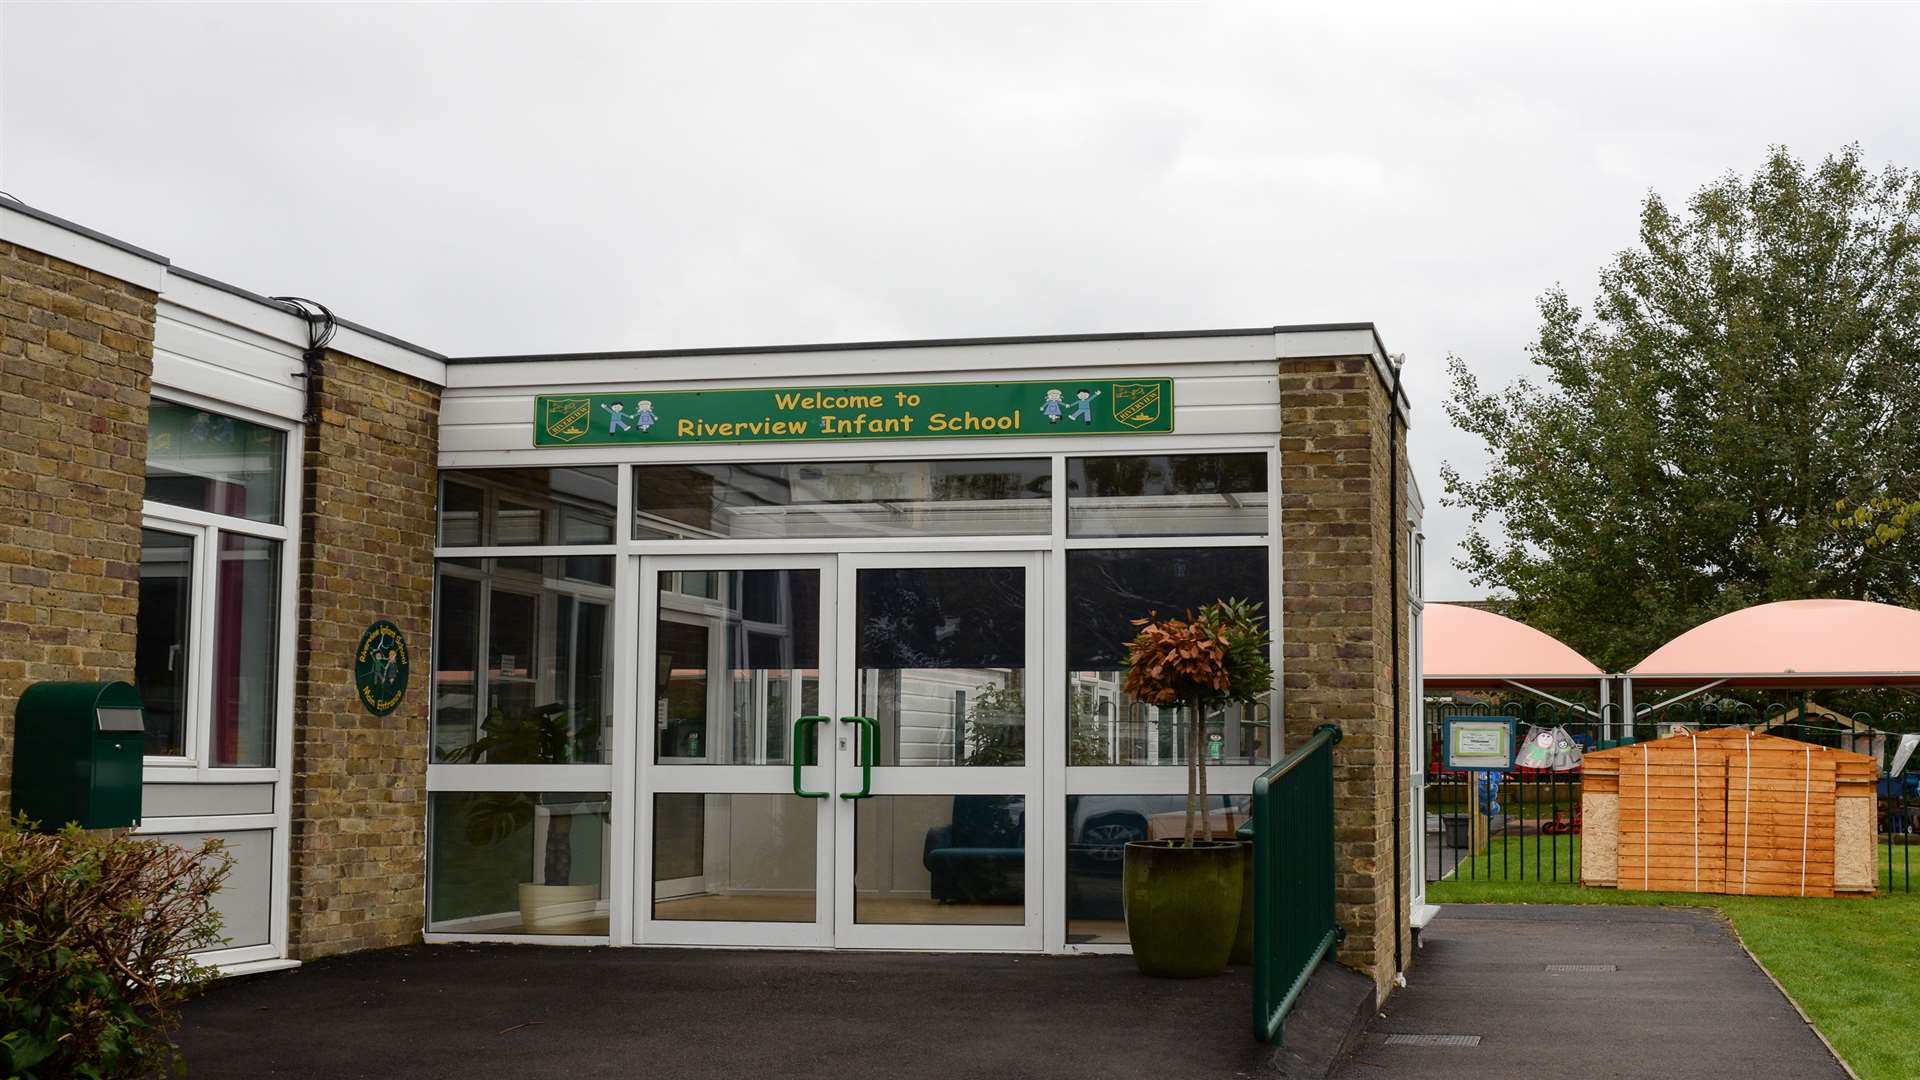 Riverview Infant School in Gravesend, which shares a site with the junior school